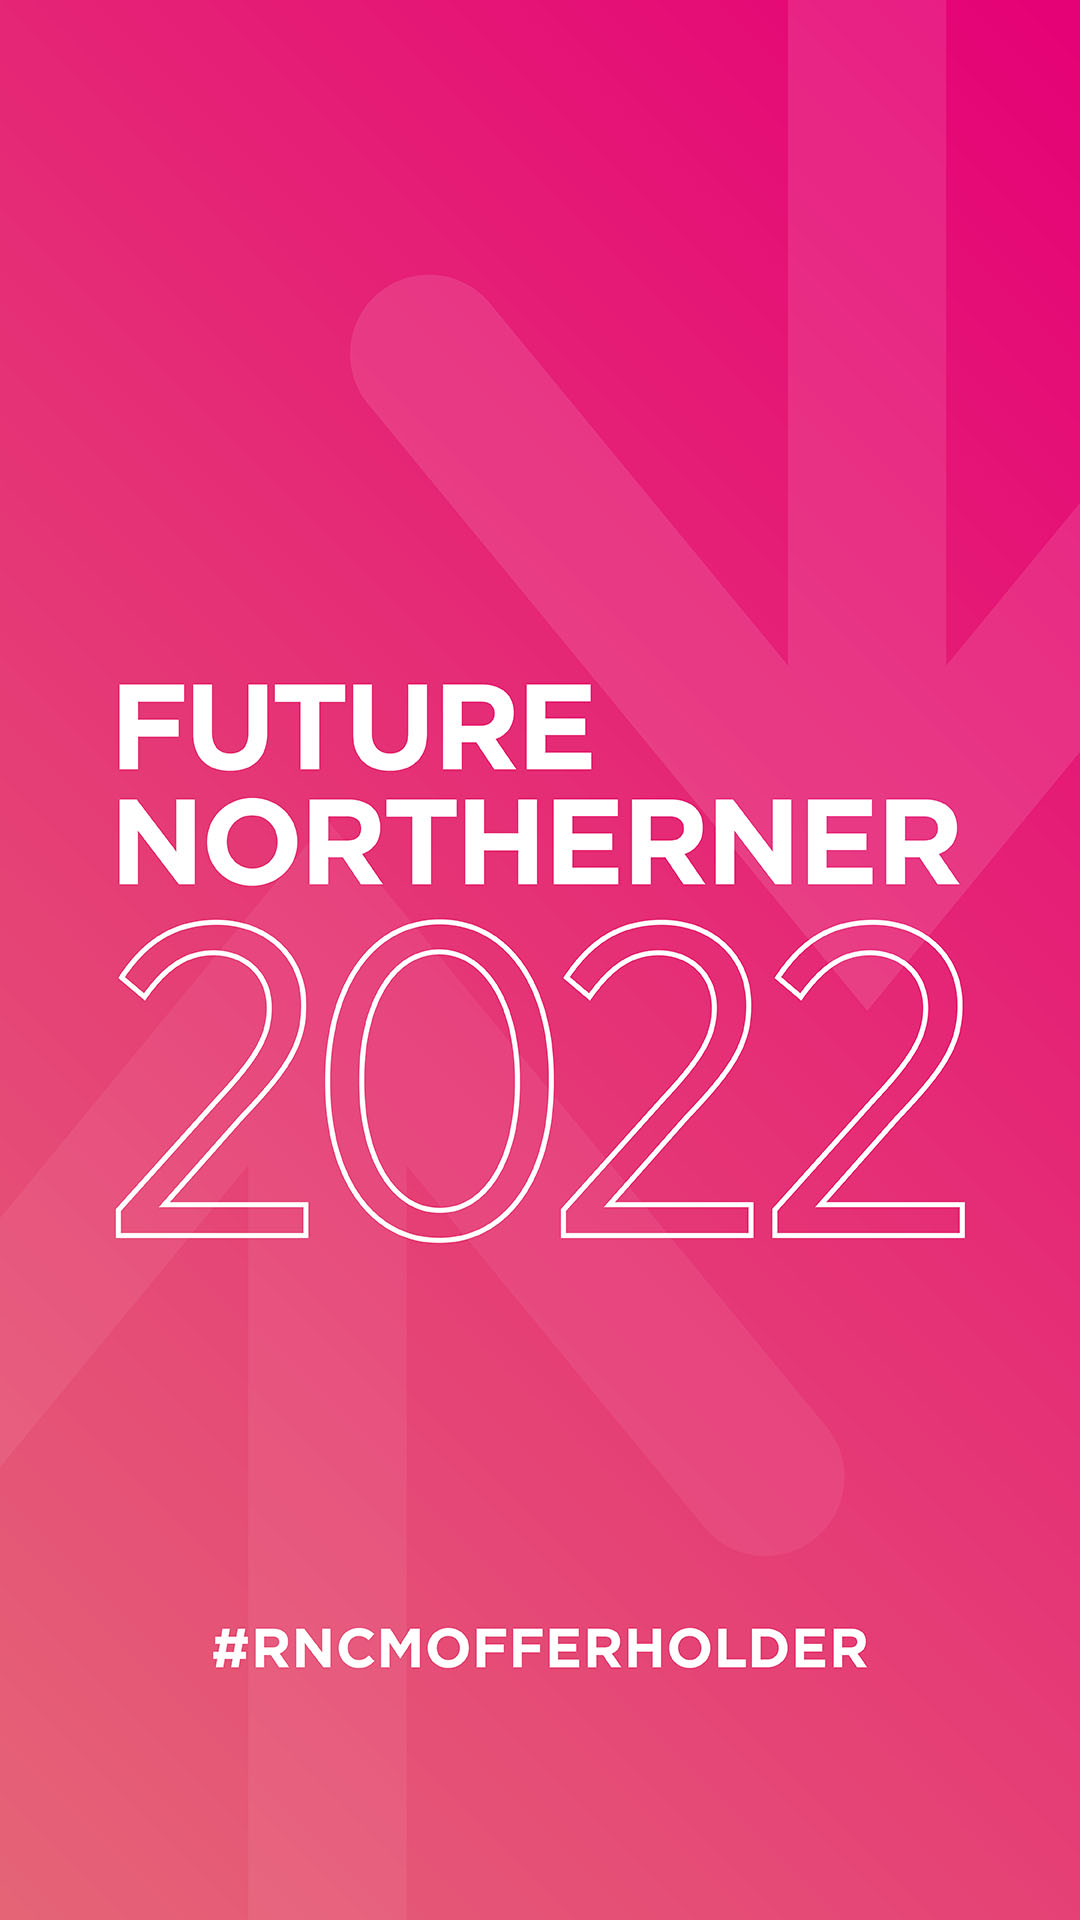 Future Northerners shareable graphic - pink background with grey writing, stories